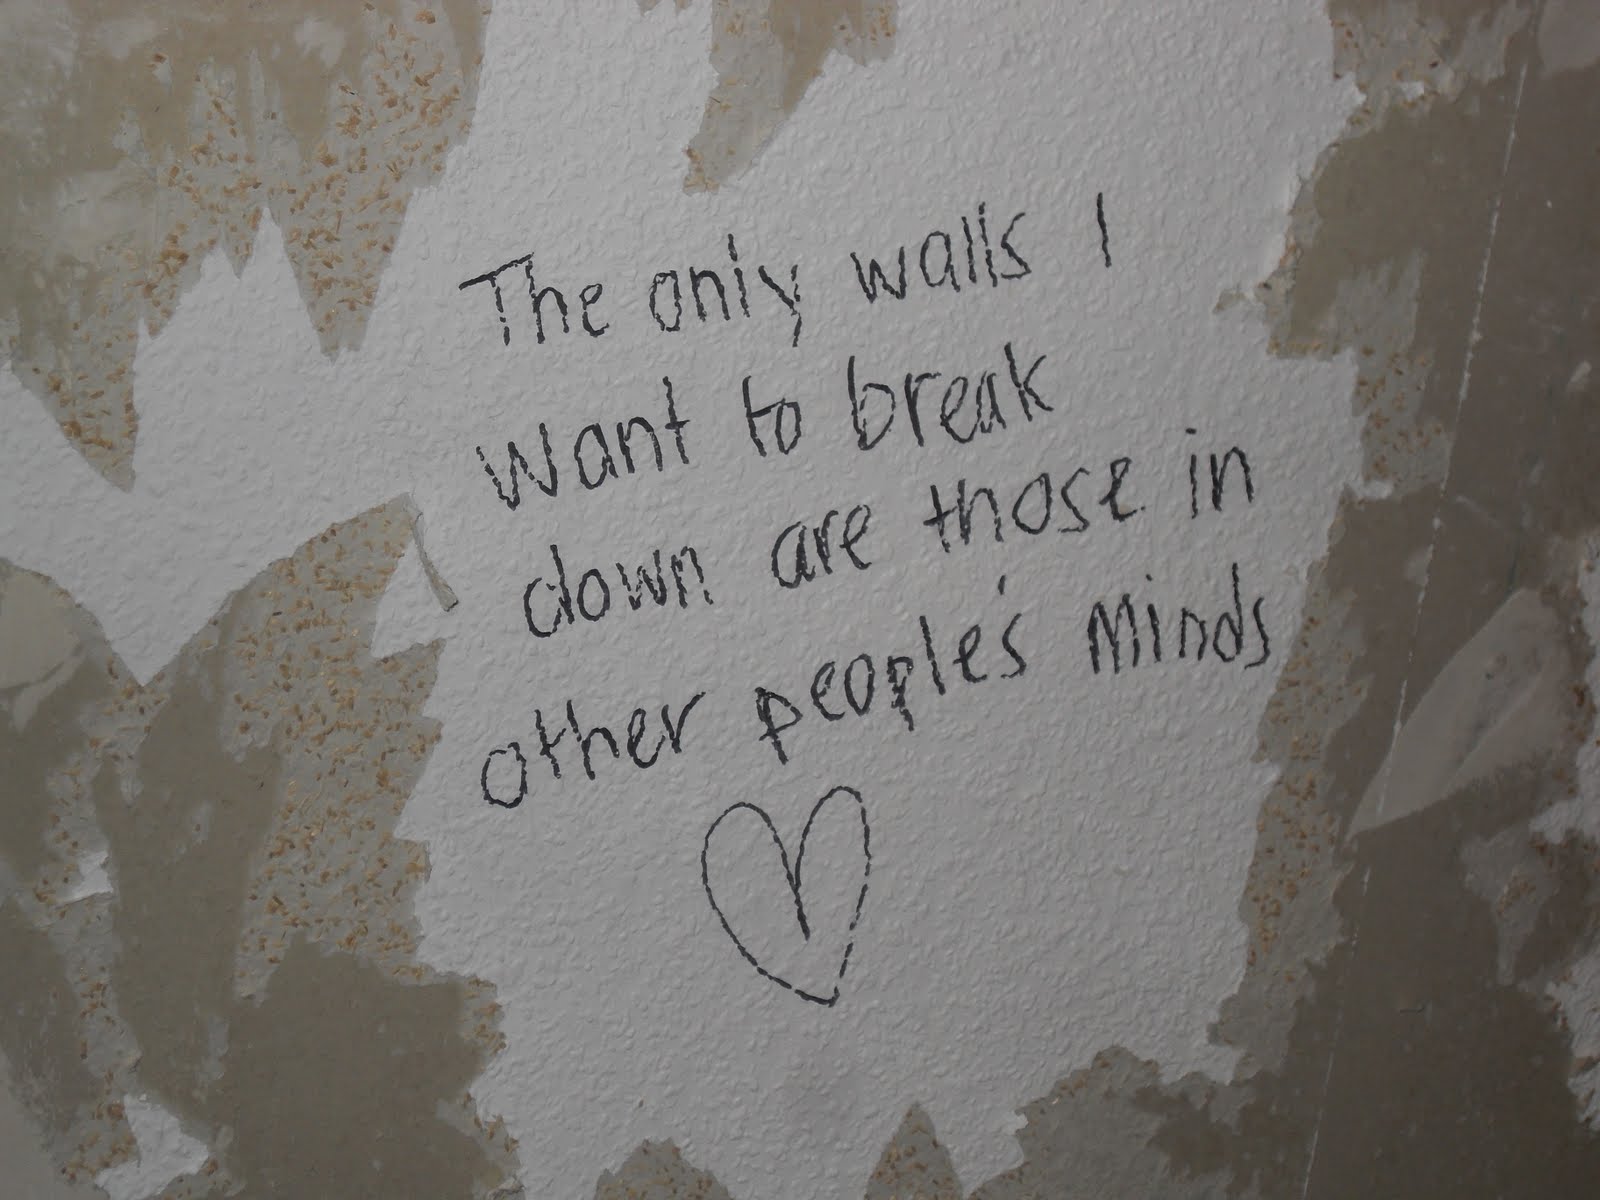 To Write Stuff On The Wall Paper Since It S Being Torn Down